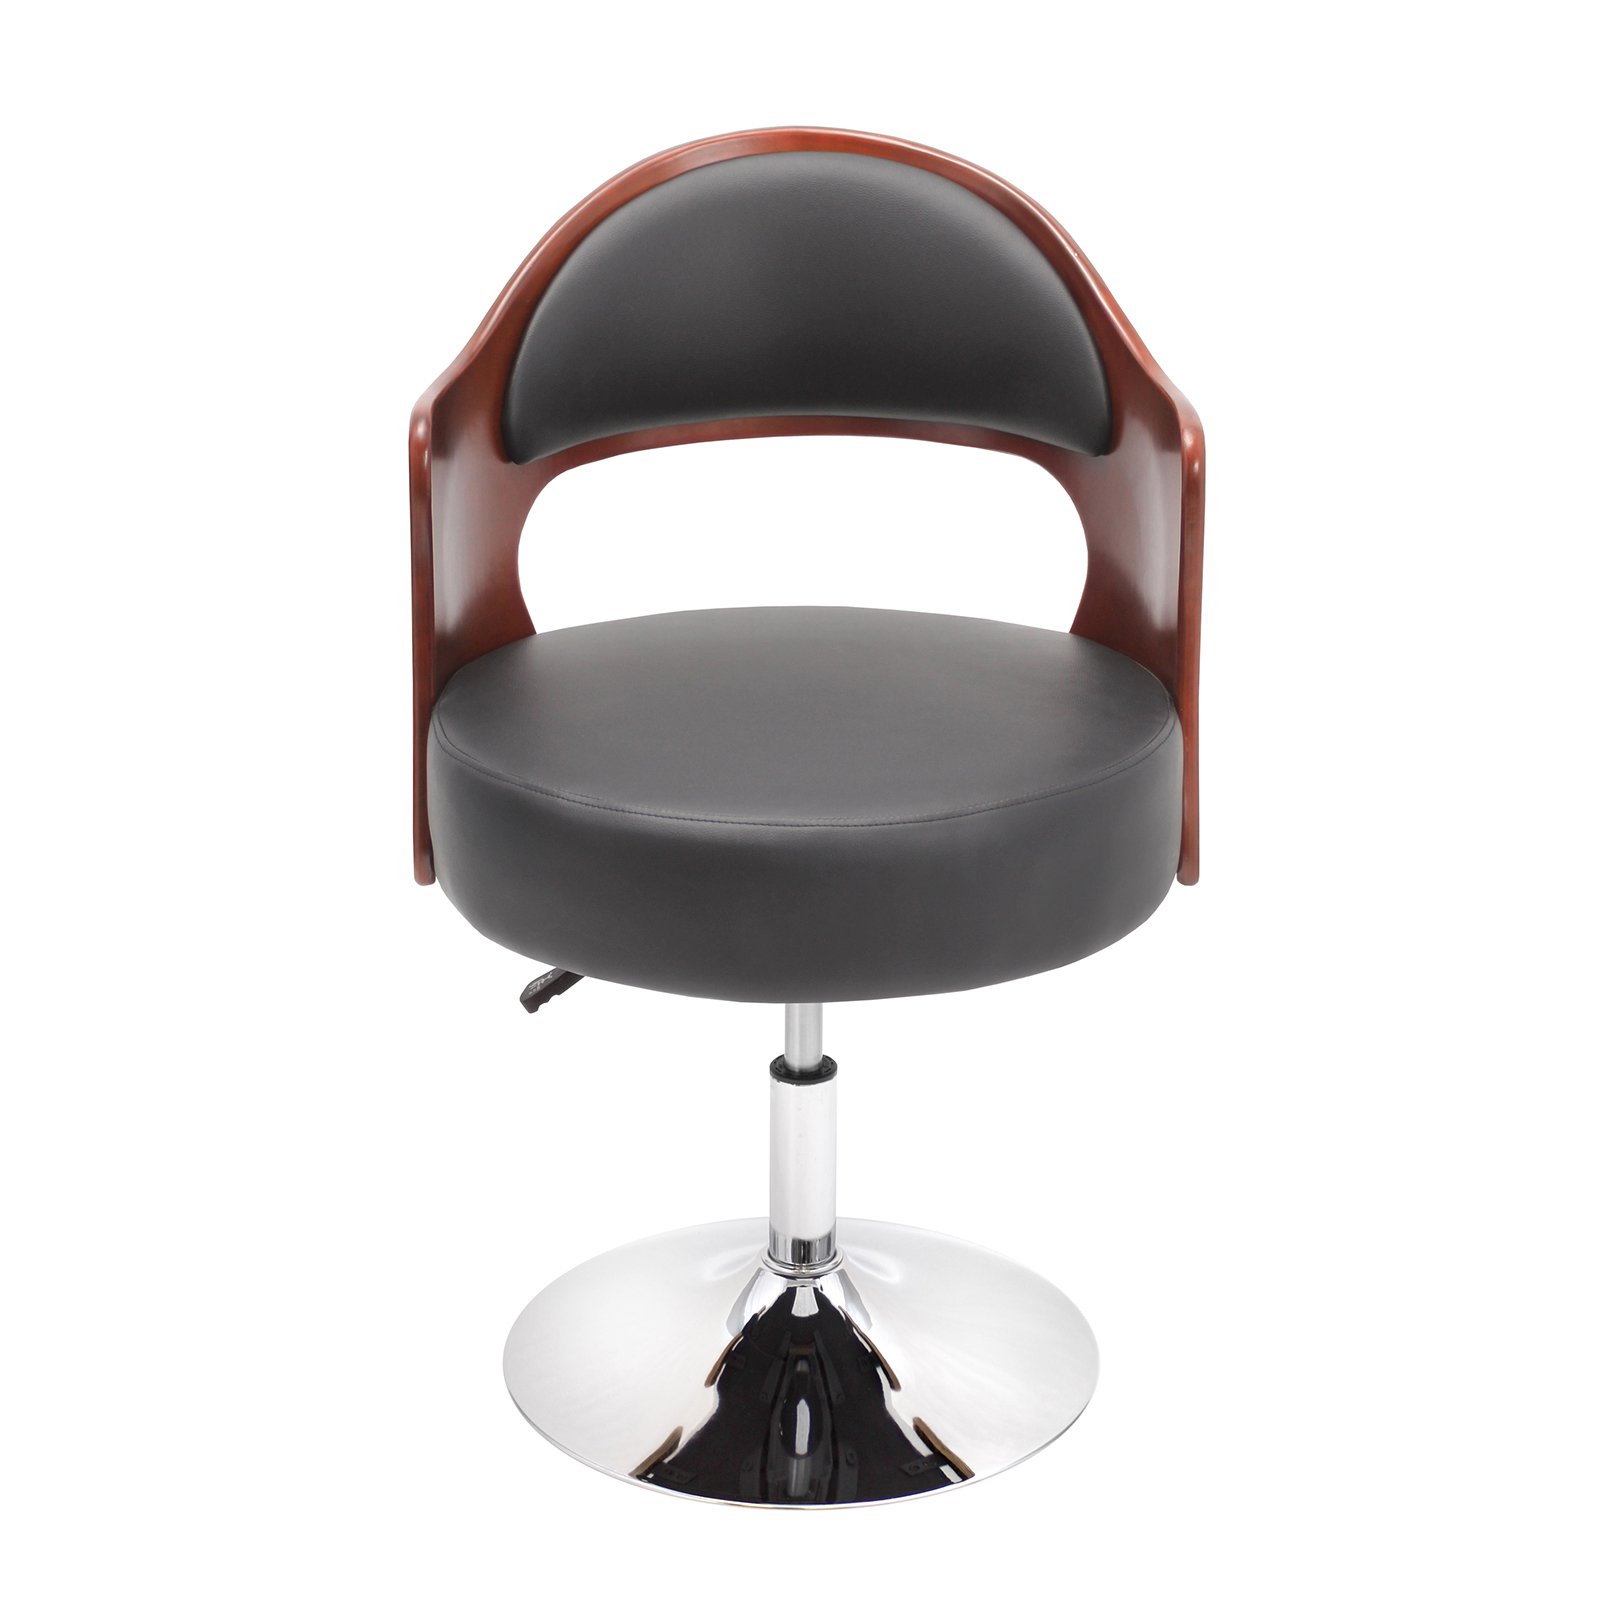 Lumisource Cello Adjustable Faux Leather Swivel Dining Chair - image 1 of 2